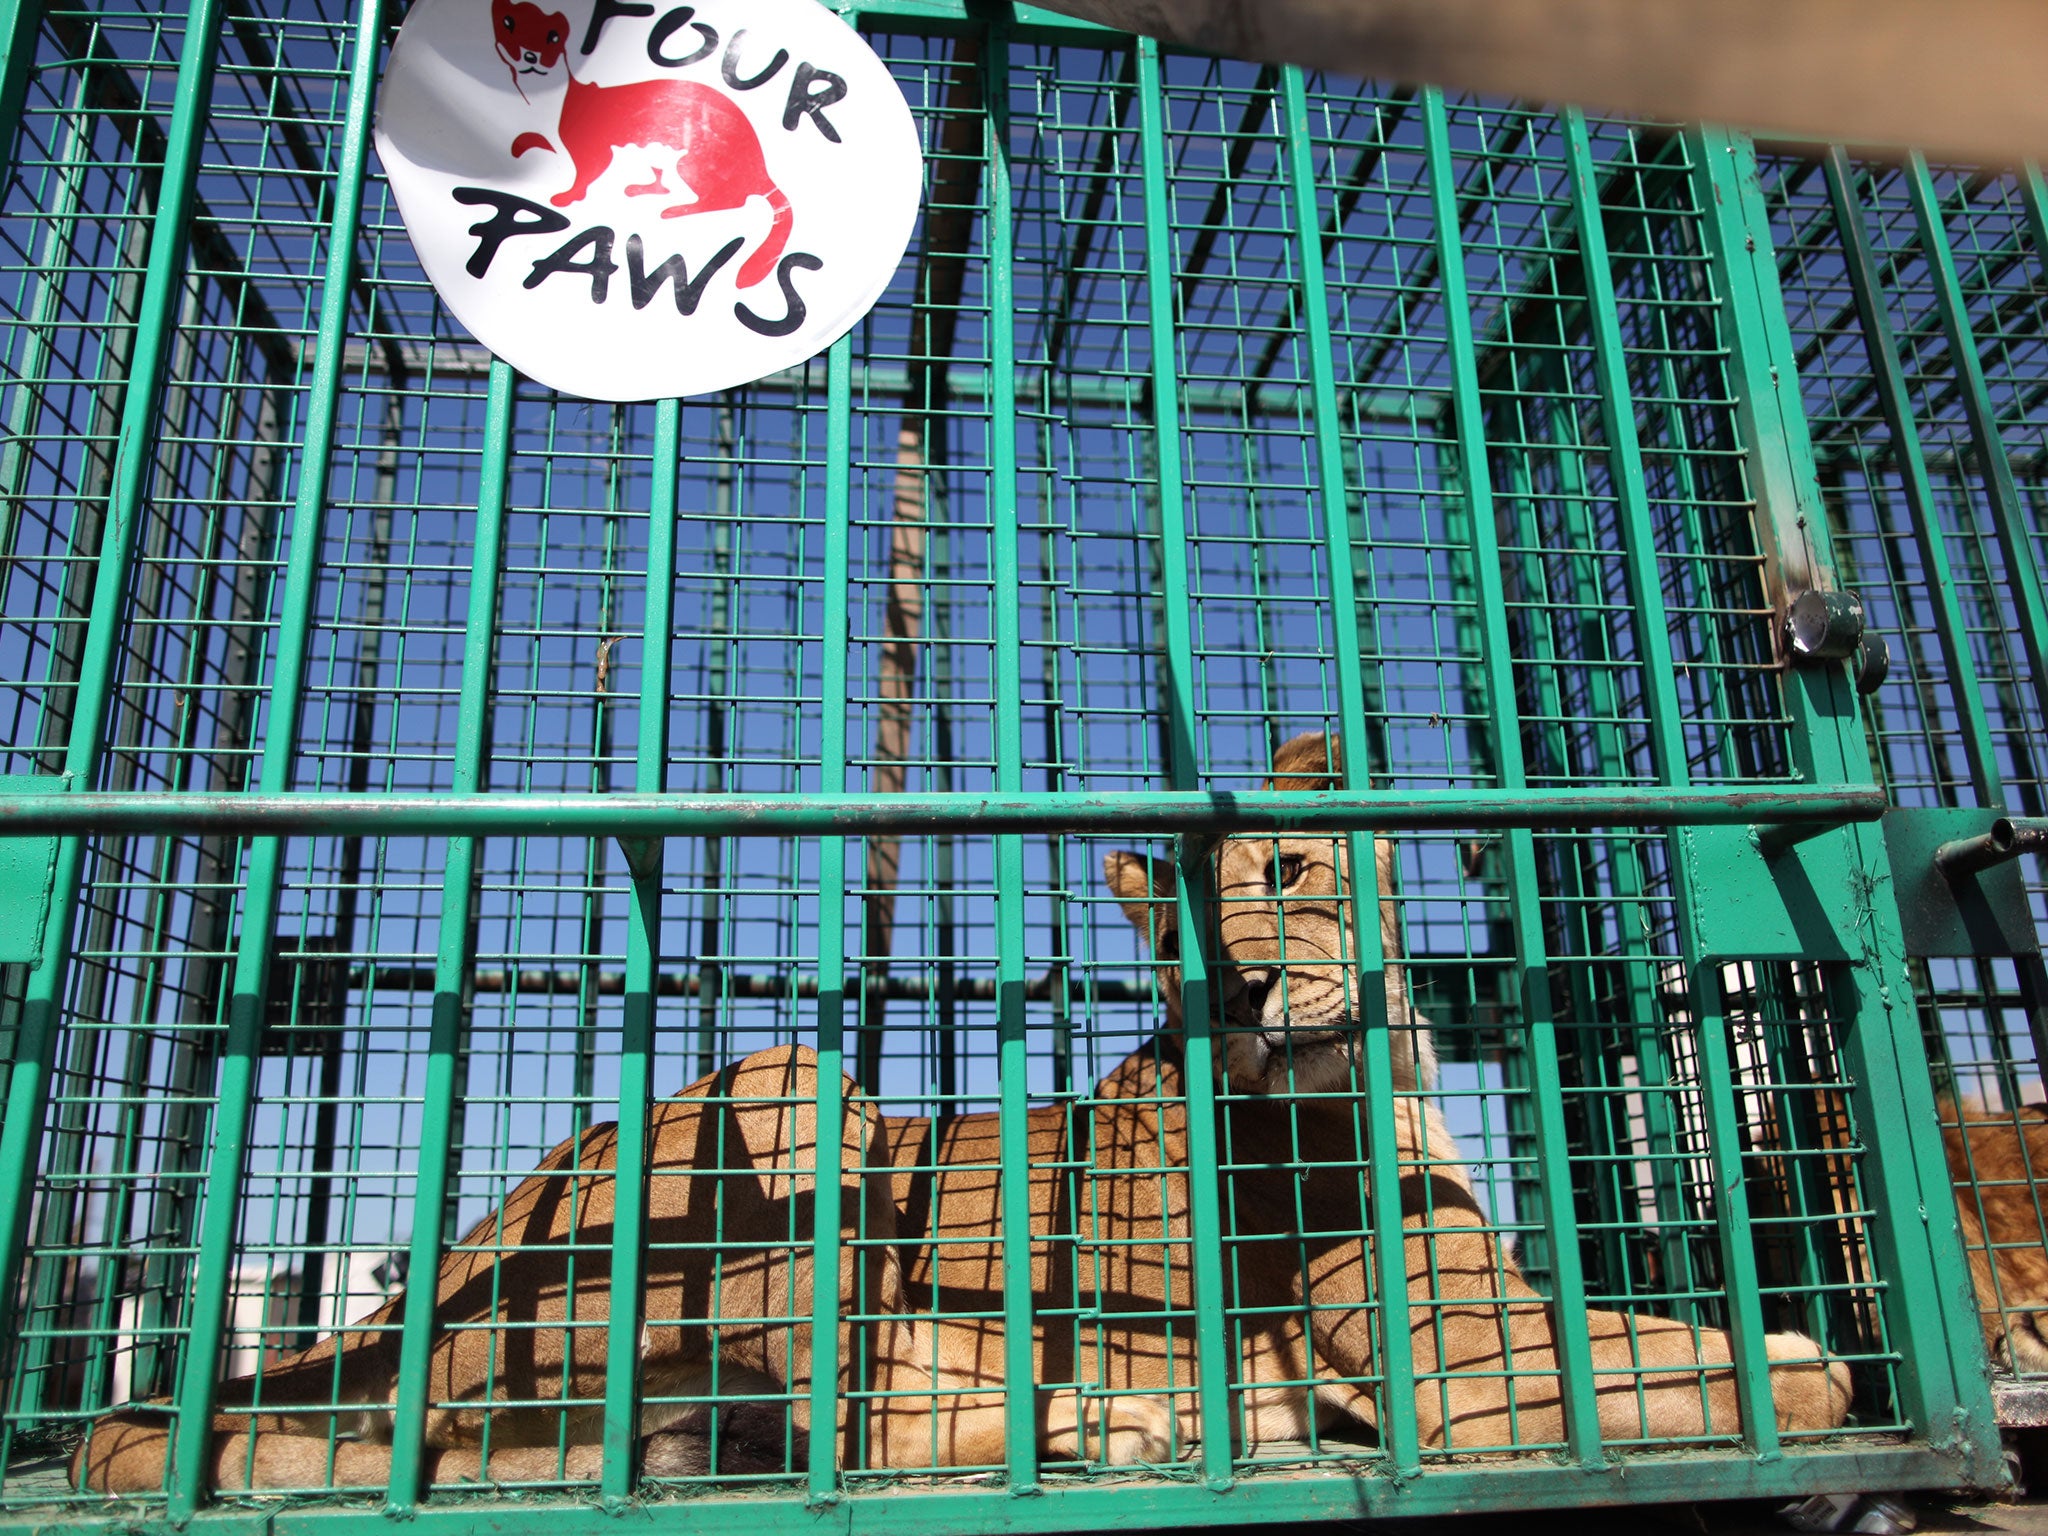 The three lions were rescued by FOUR PAWS from the heavily-damaged Al-Bisan Zoo in Gaza and taken to a rescue centre in Jordan